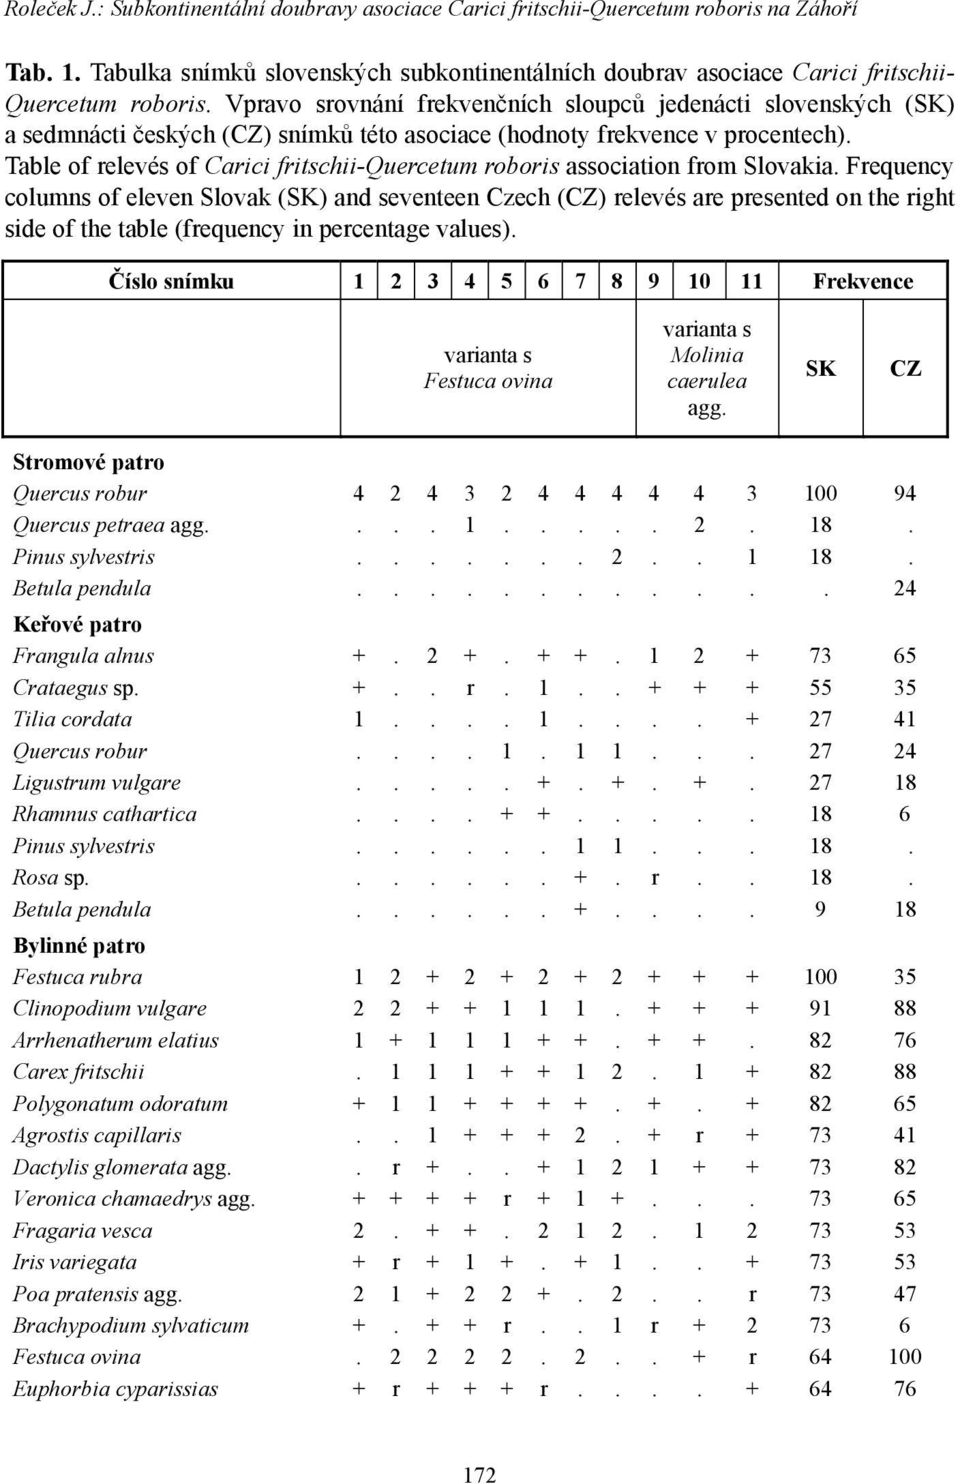 Table of relevés of Carici fritschii-quercetum roboris association from Slovakia.